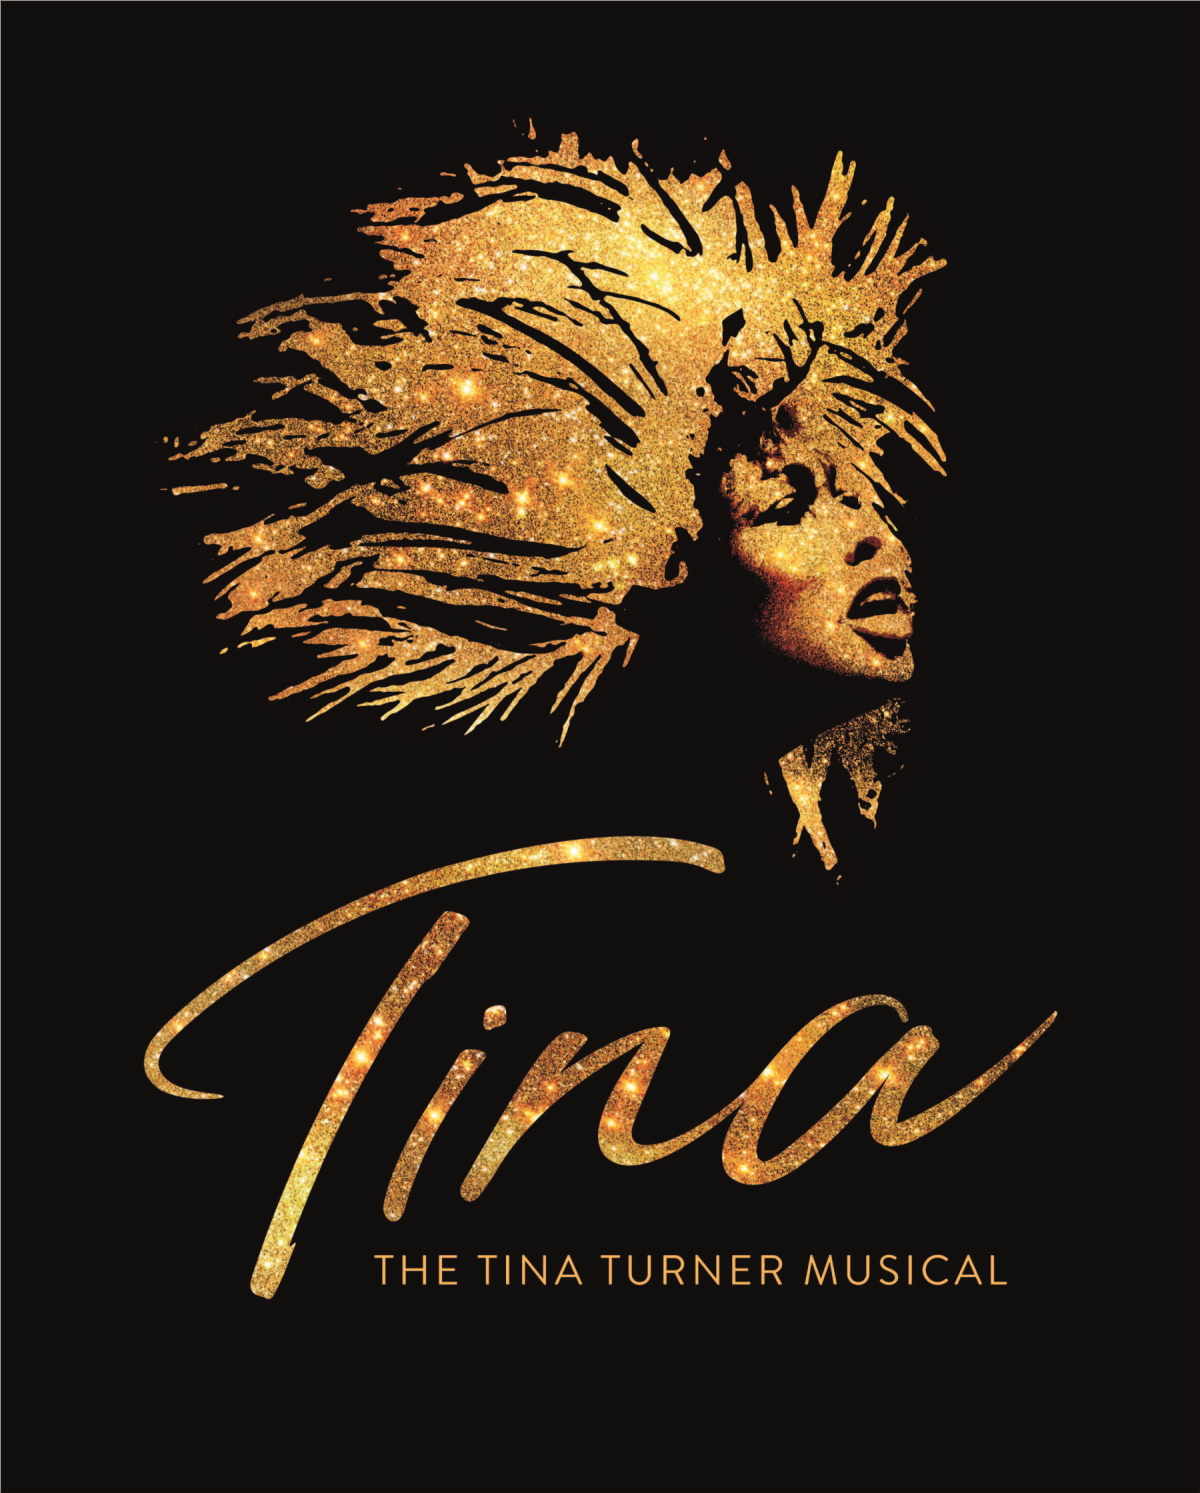 Artwork from the Broadway show "Tina"